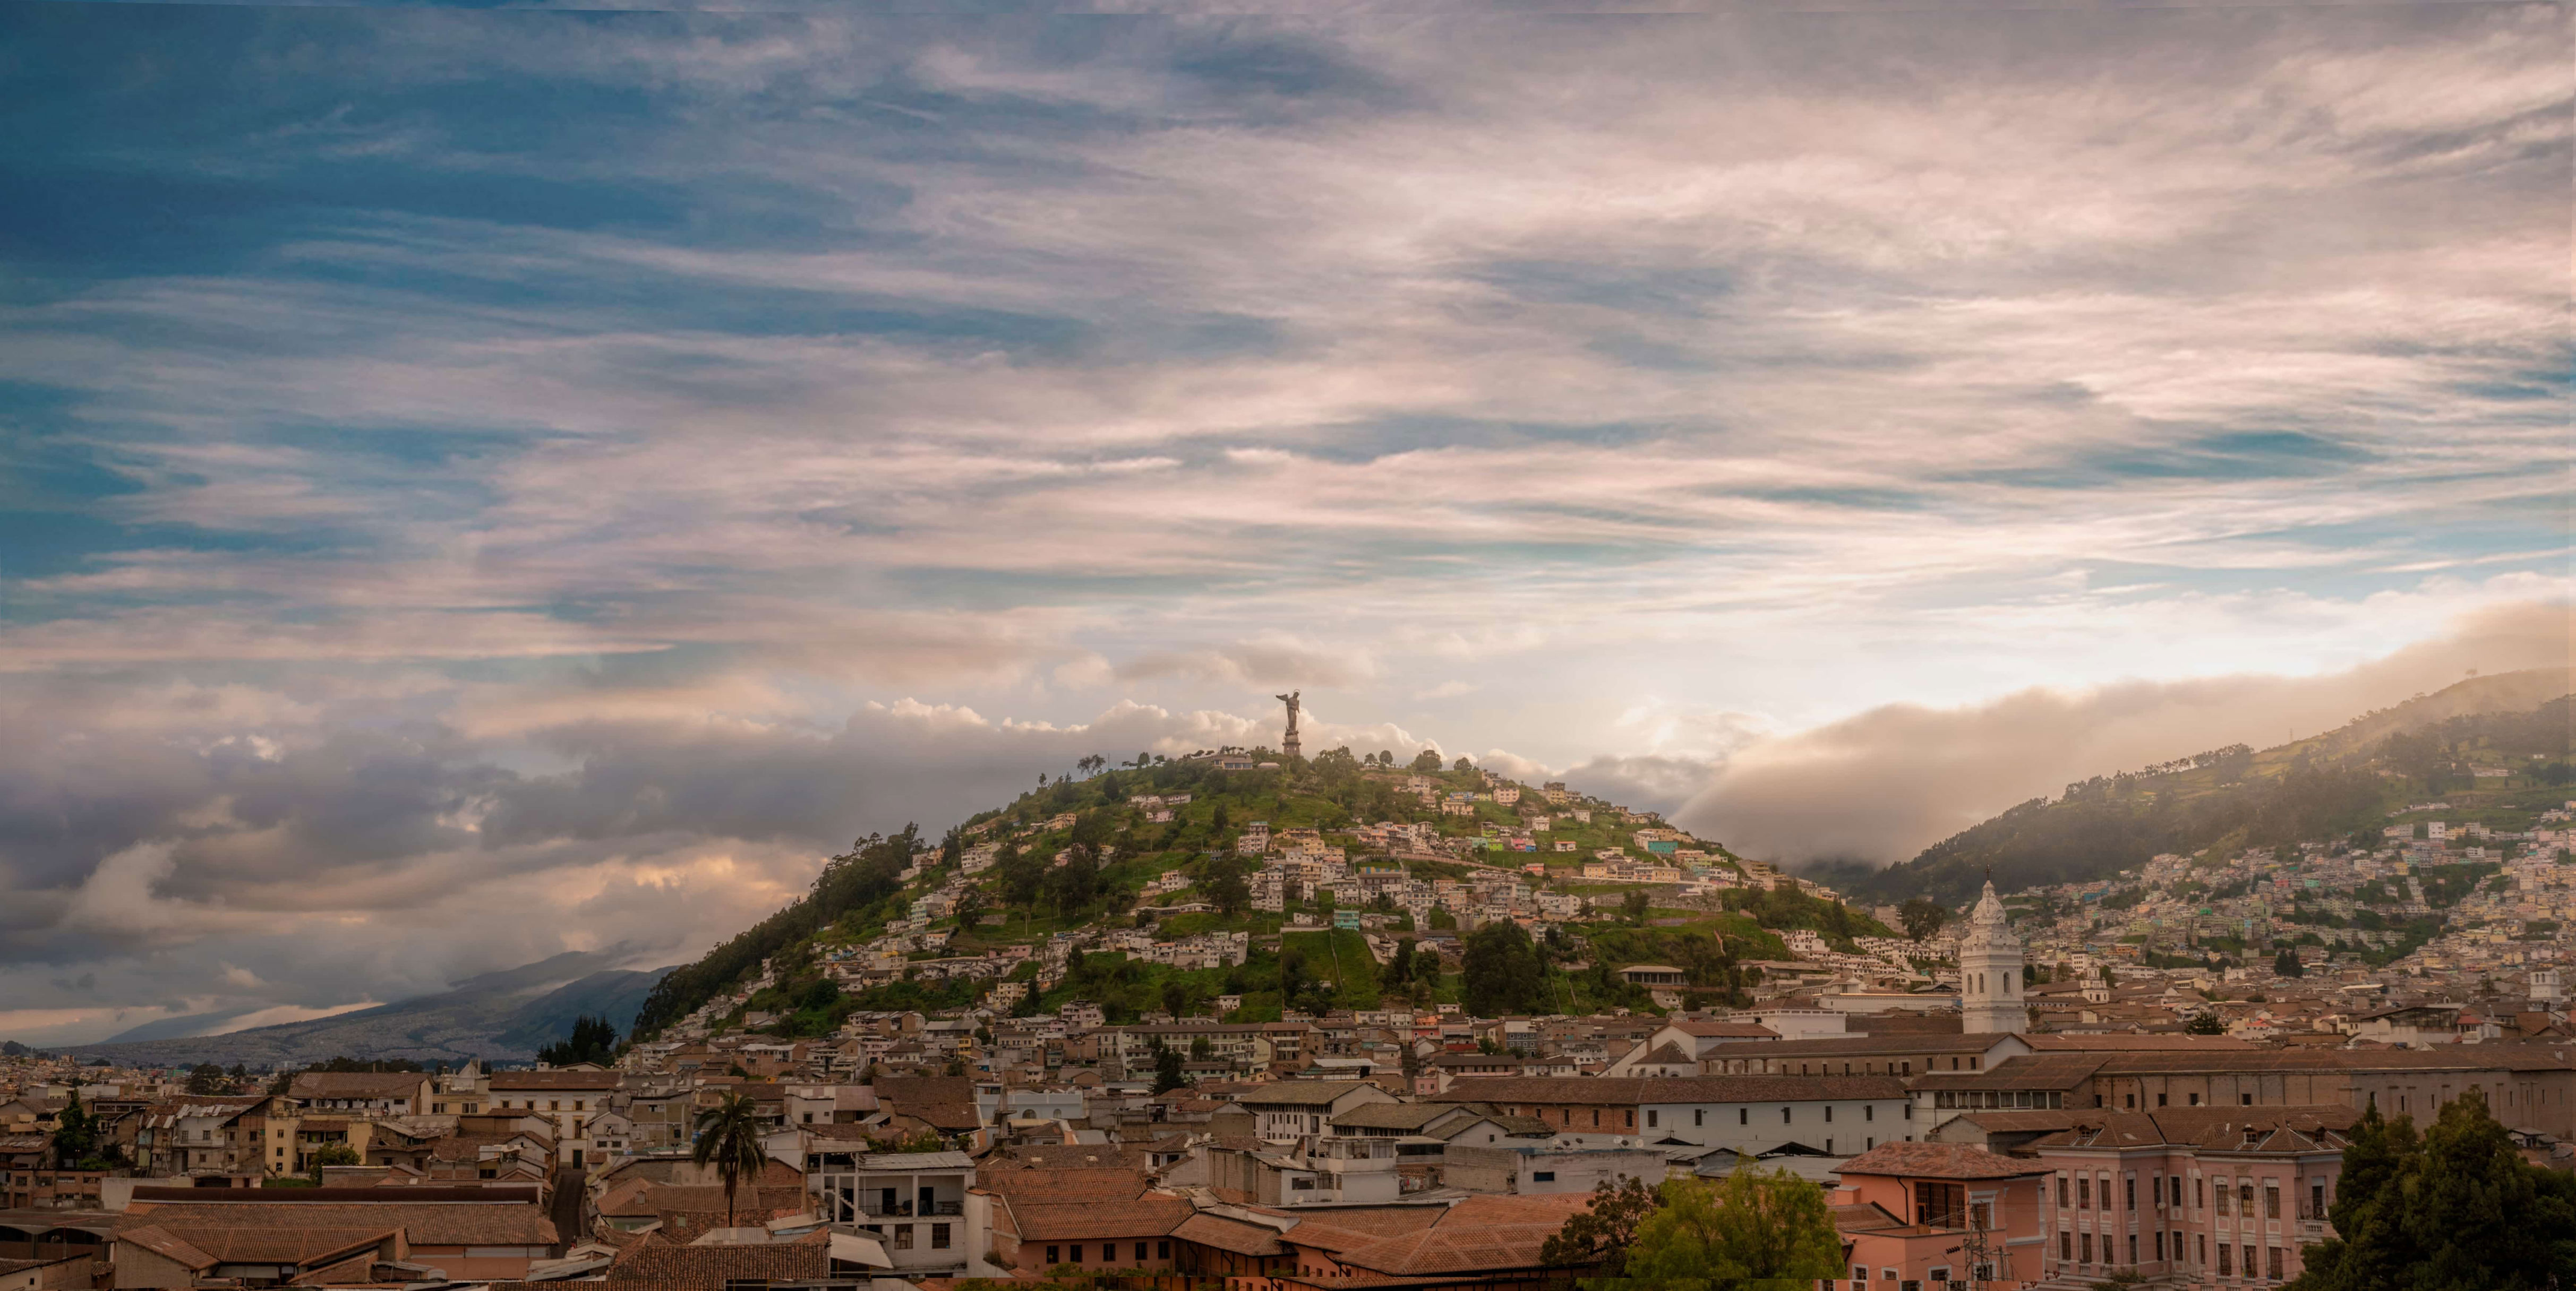 <p>Making <em>Condé Nast Traveller</em>’s Best Places to Go in 2024, the capital of Ecuador sits on the Andean foothills, atop the ruins of an Inca city. The first city to receive a <a href="https://whc.unesco.org/en/list/2/" title="https://whc.unesco.org/en/list/2/">UNESCO World Heritage Site designation</a>, Quito has a well-preserved historic centre with must-see sites including the Basílica del Voto Nacional, the Plaza de la Independencia, and the renowned Plaza de San Francisco. The culinary scene in Quito is heating up with buzzy restaurants like <a href="https://www.instagram.com/nuema_restaurante/" title="https://www.instagram.com/nuema_restaurante/">Nuema</a>, home to Pía Salazar, who was crowned The World’s Best Pastry Chef in 2023. </p>